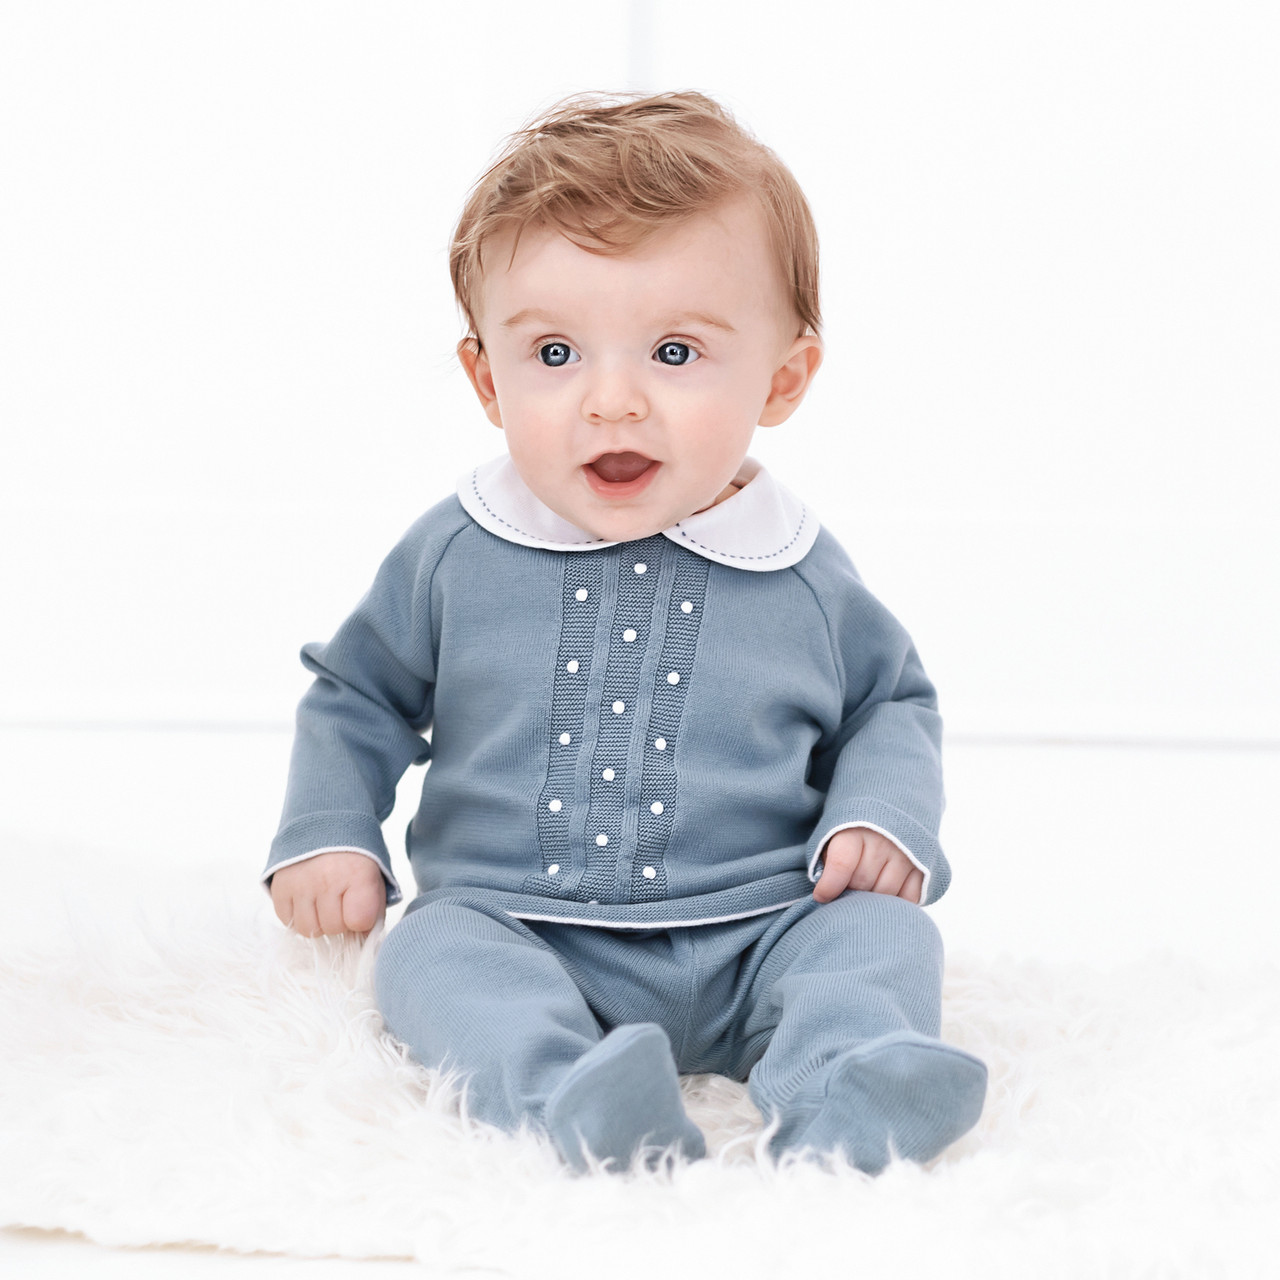 Knitted Newborn Coming Home Outfit I Baby Boy Knitted Outfit |Feltman ...